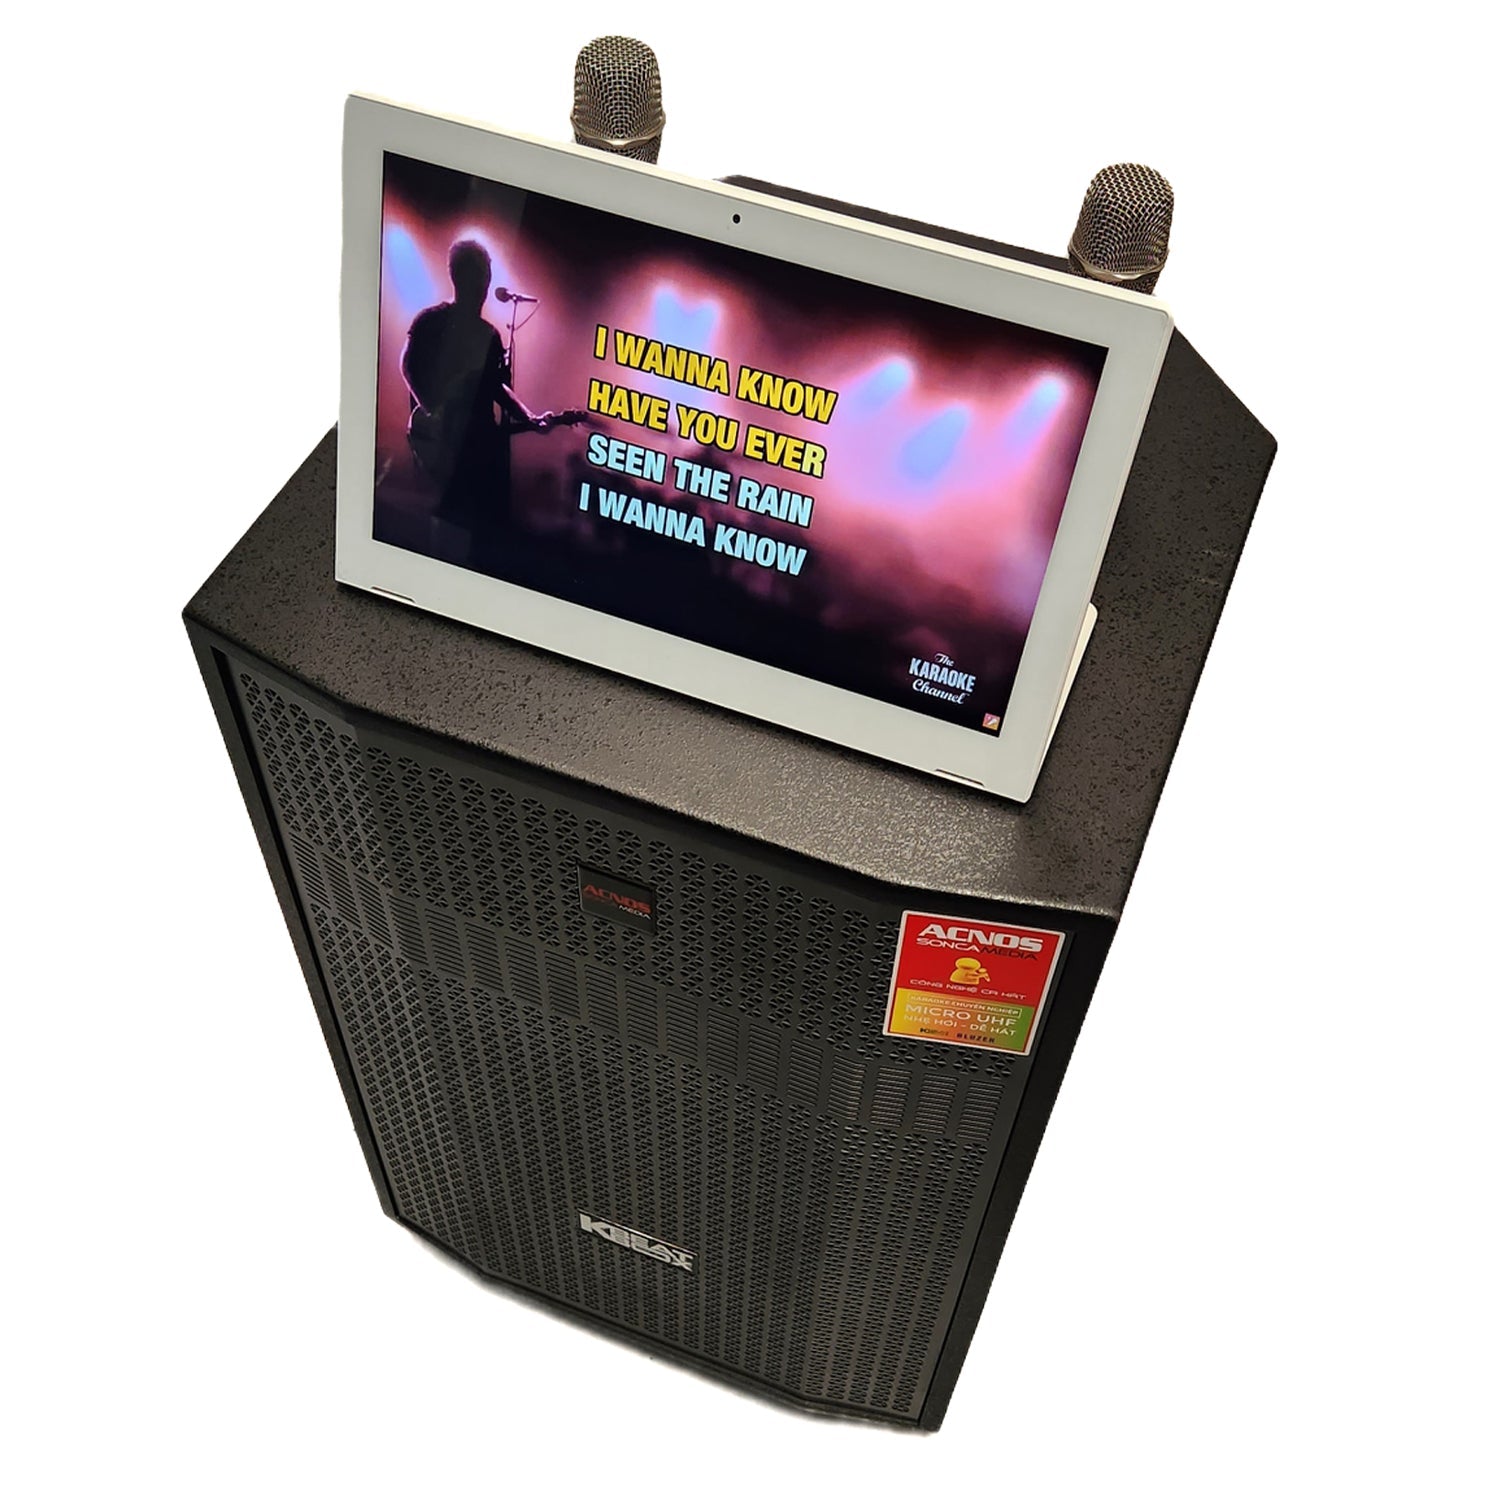 15.6" Karaoke Touch Screen System (Android OS + WIFI + Bluetooth + YouTube) - Karaoke Home Entertainment